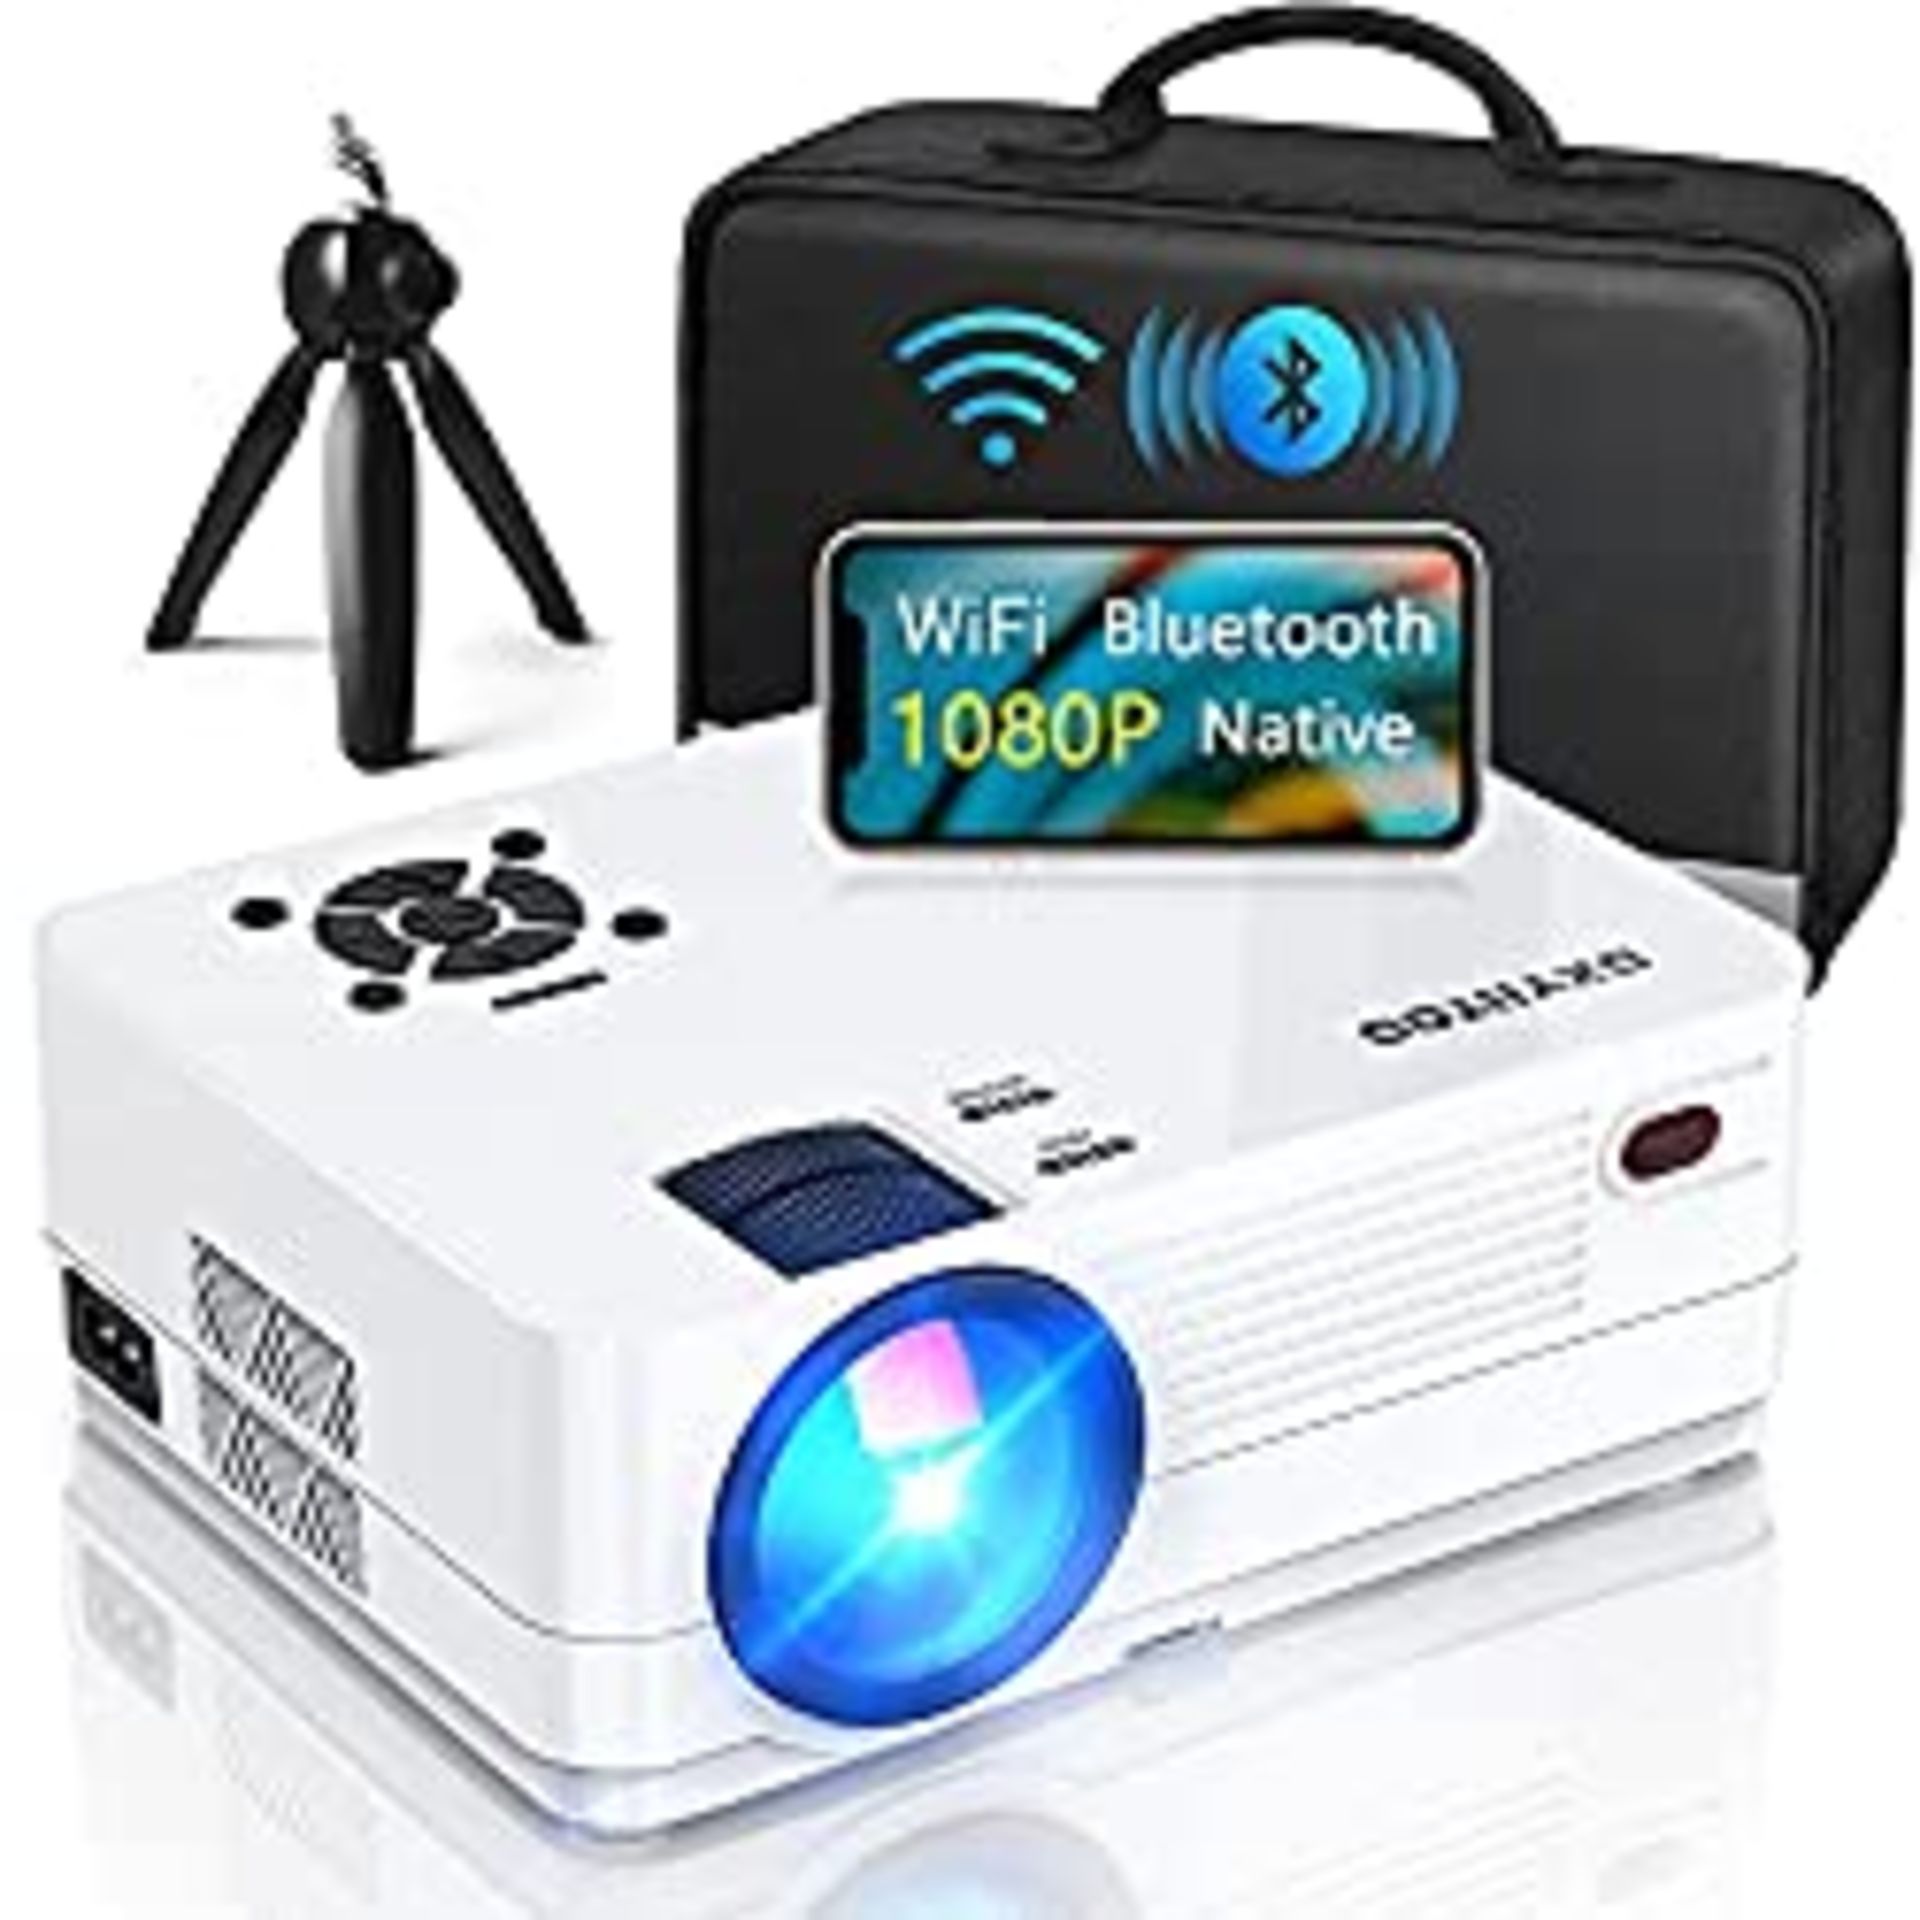 RRP £173.15 Native 1080P Projector with WiFi and Two-Way Bluetooth